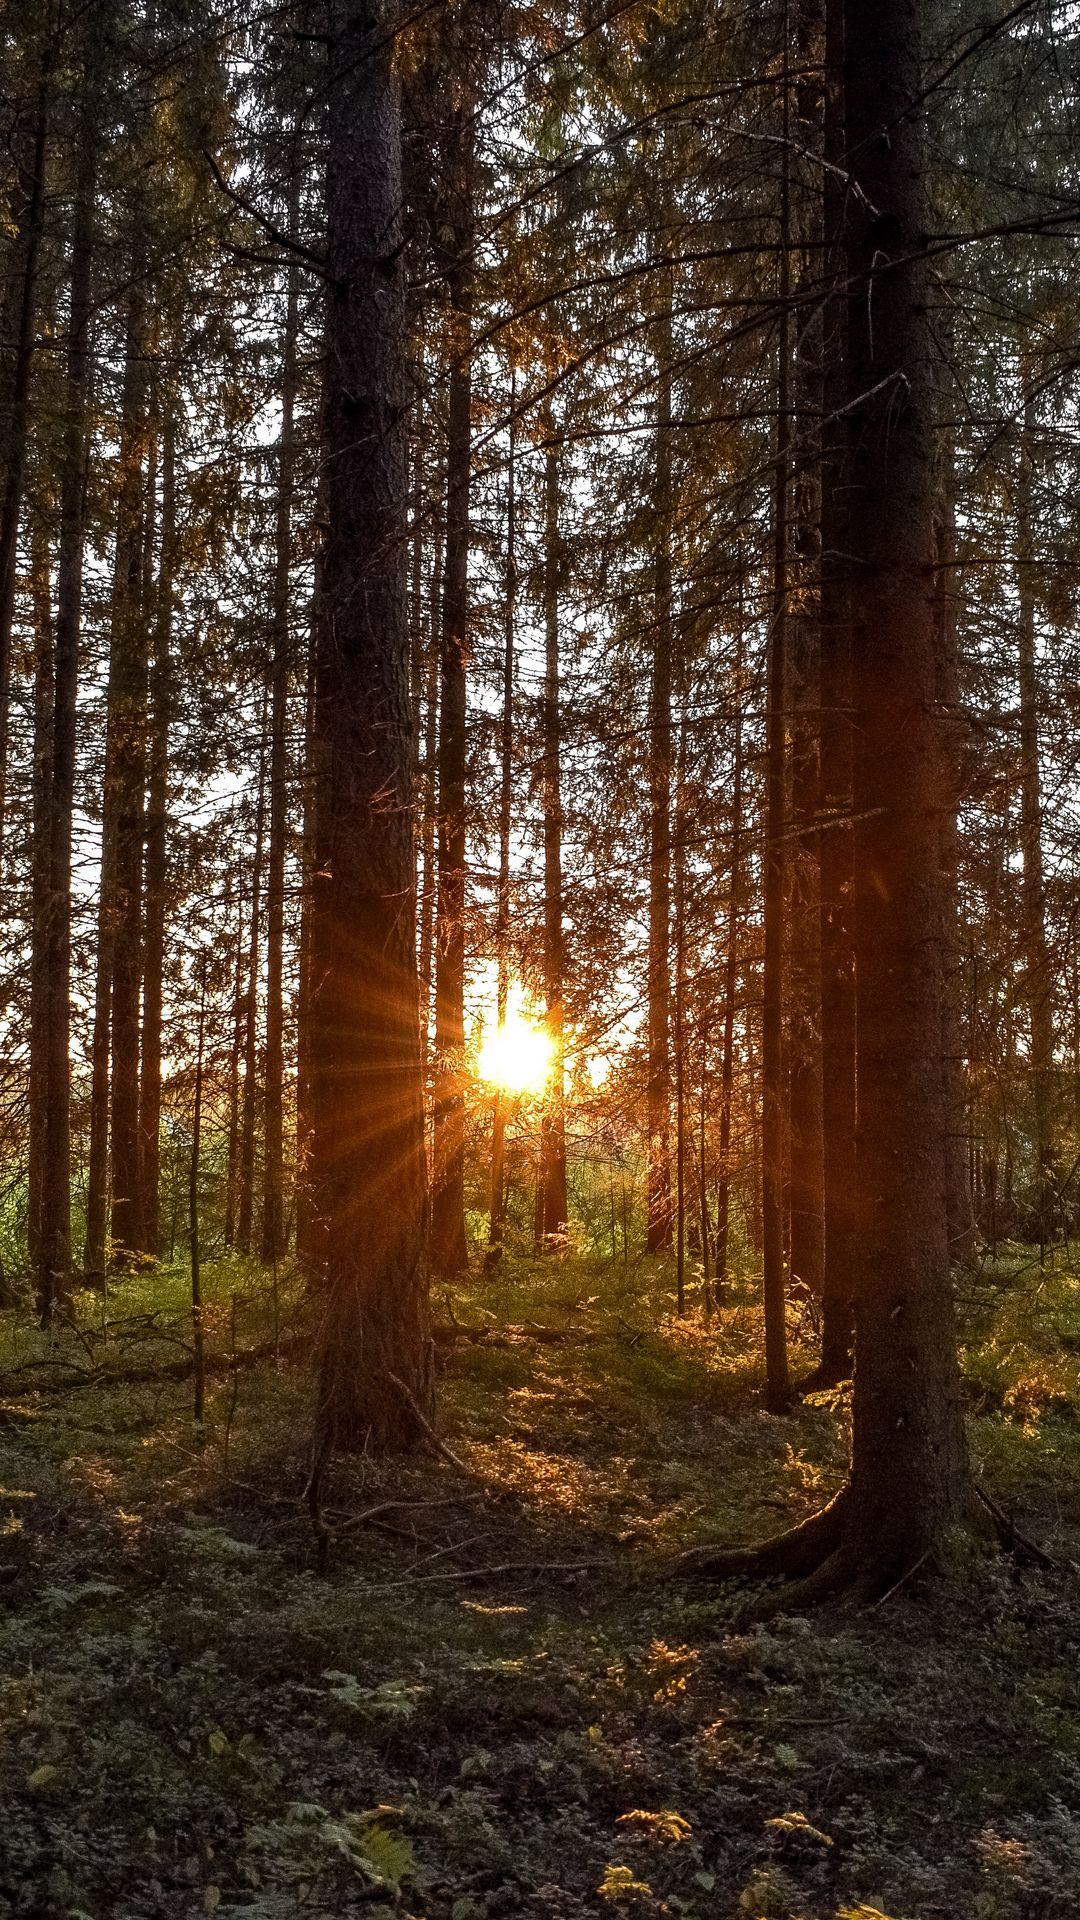 Download wallpaper 1080x1920 forest, sunlight, trees, rays, sunset ...